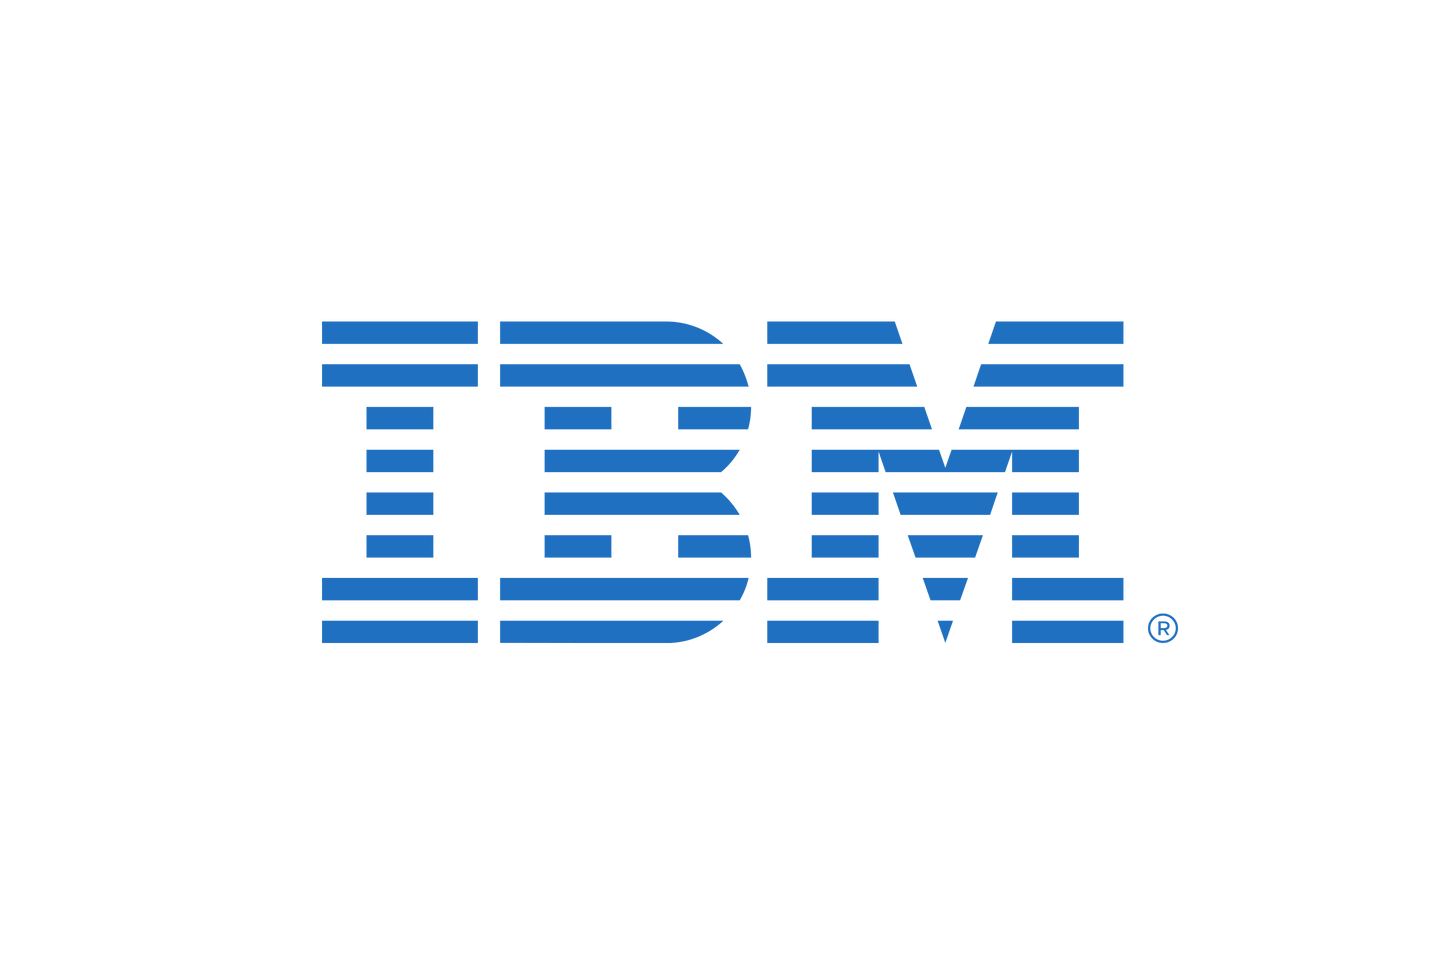 IBM Db2 Advanced Edition VPC Option for Linux on IBM zSystems Virtual Processor Core Monthly License